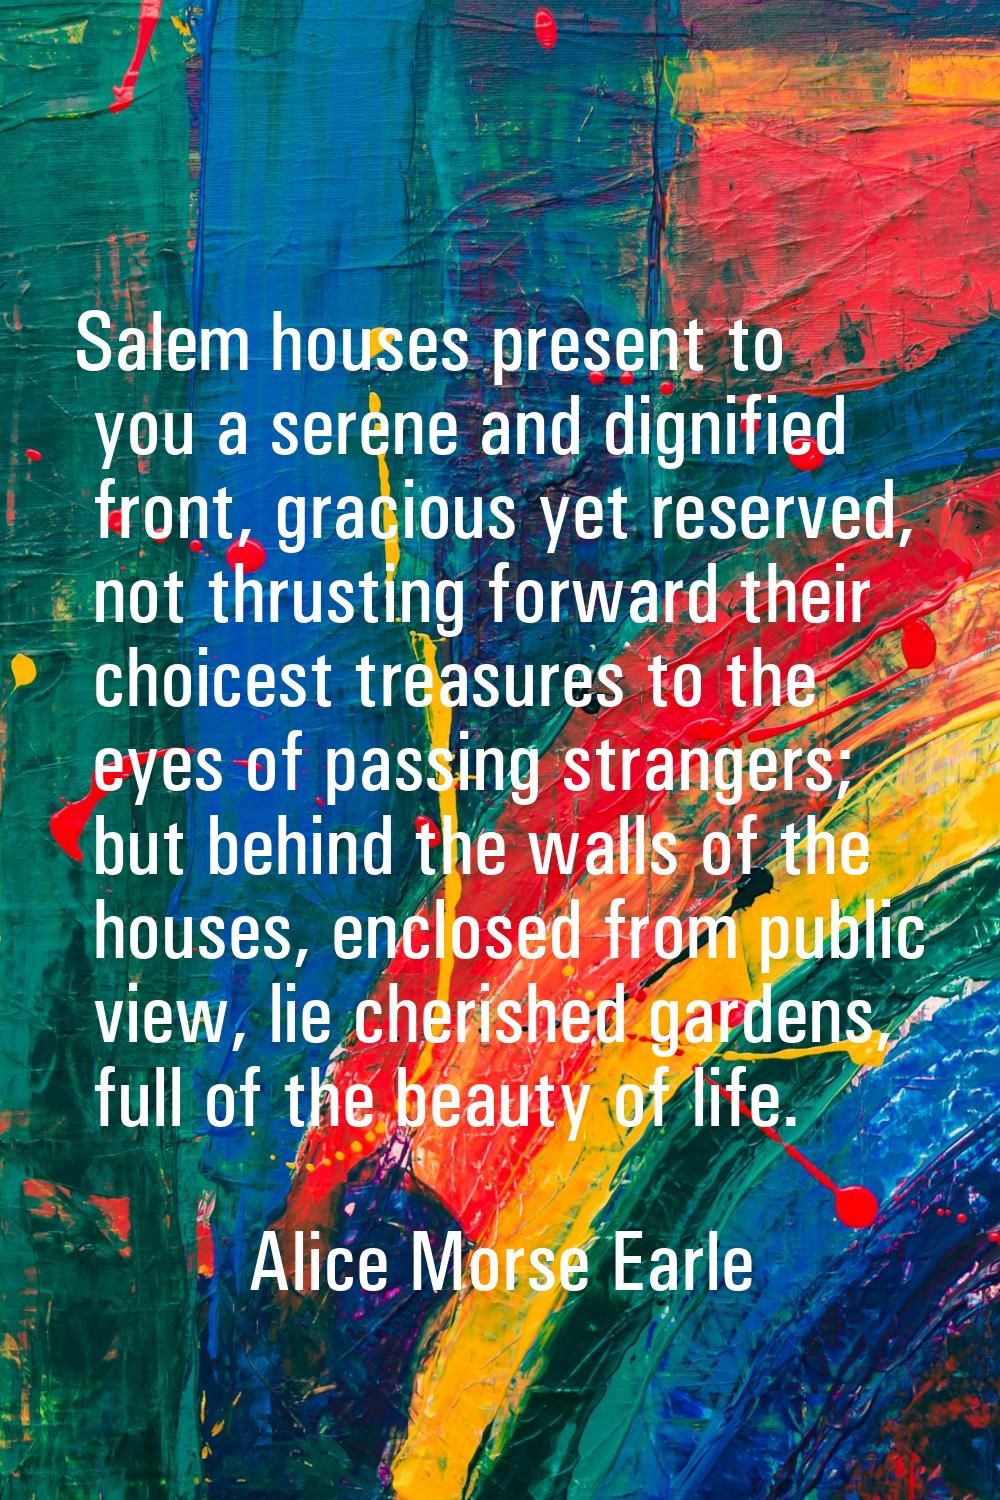 Salem houses present to you a serene and dignified front, gracious yet reserved, not thrusting forw